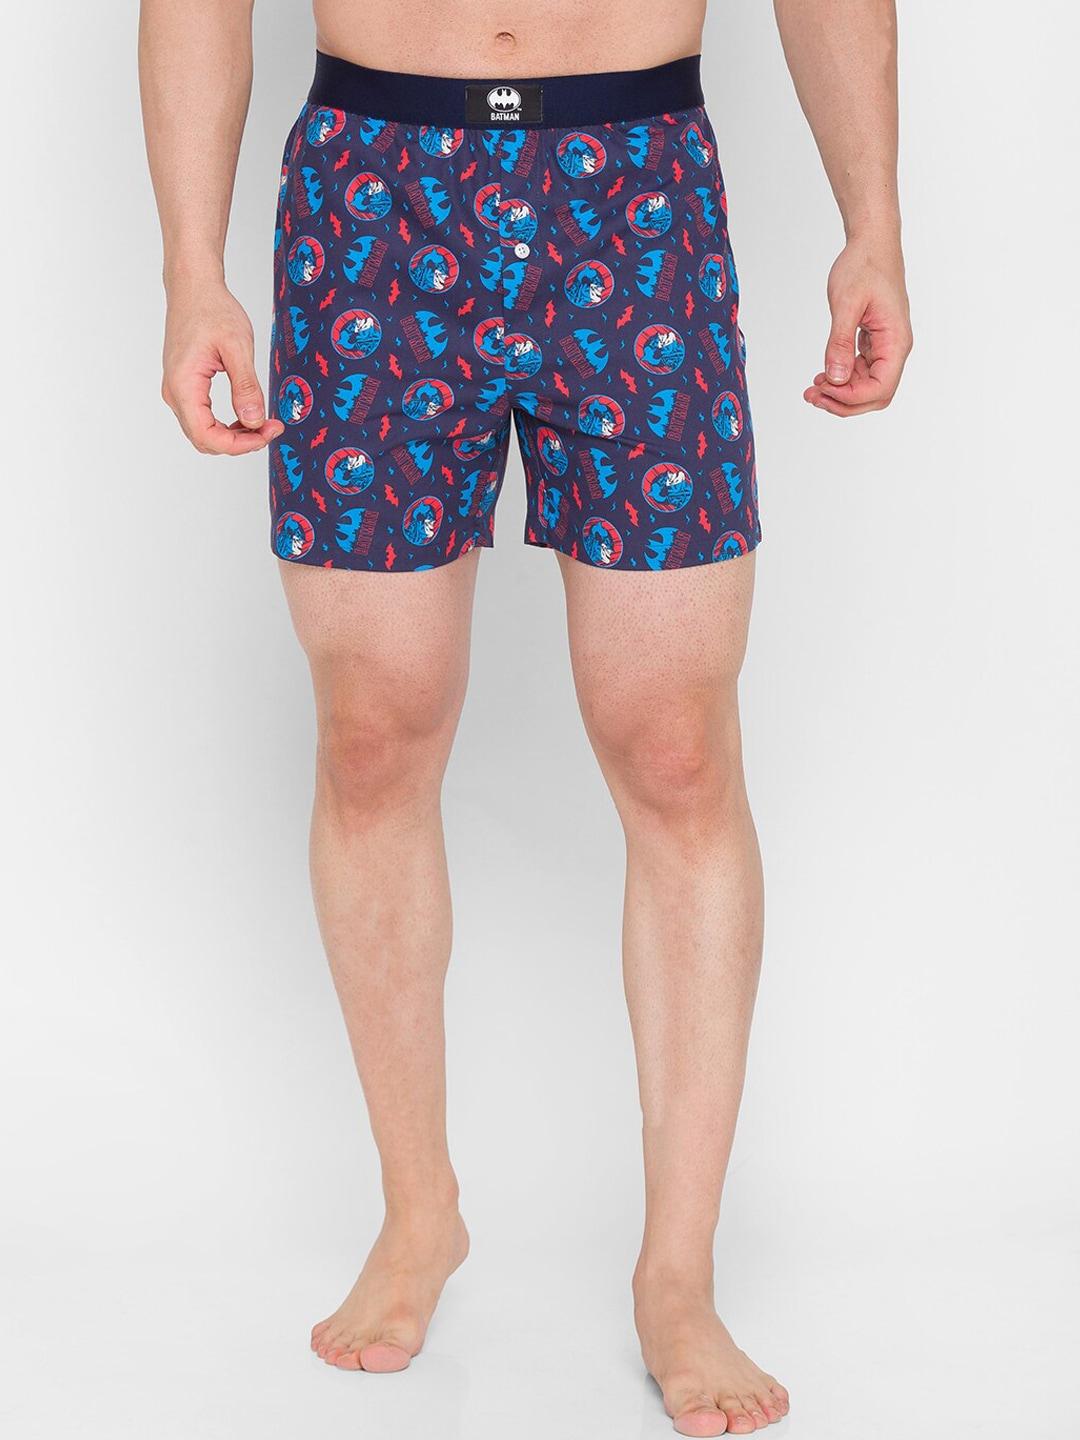 smugglerz-men-navy-blue-&-red-printed-pure-cotton-boxer